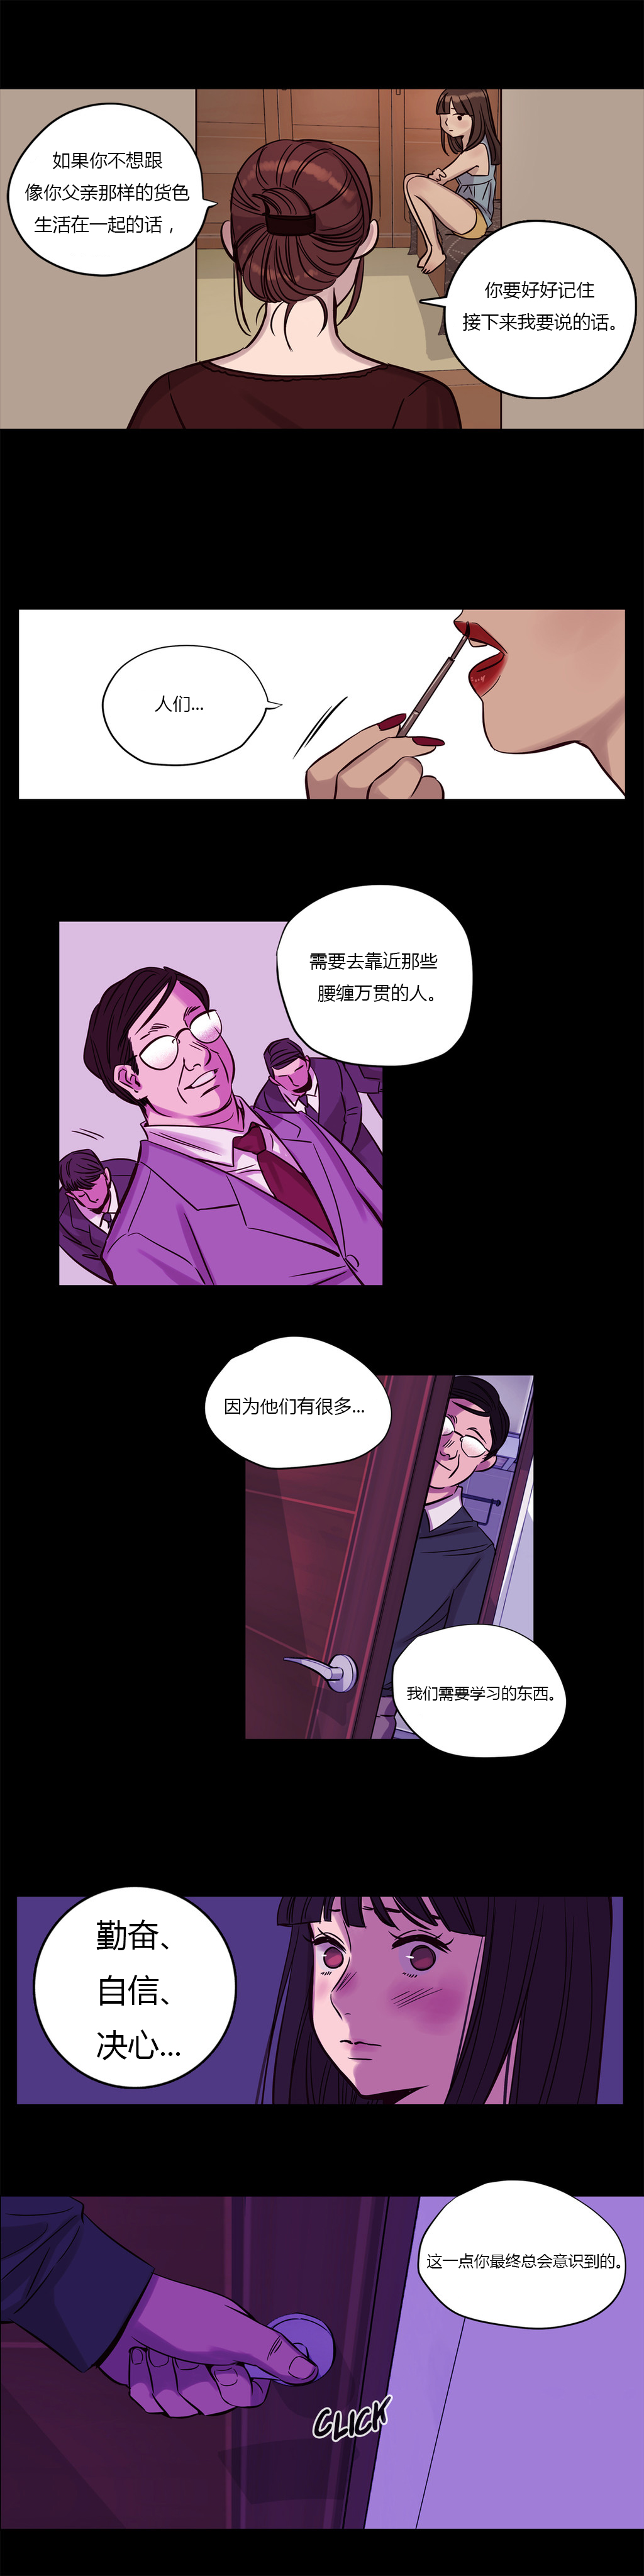 [Ramjak] Atonement Camp Ch.14-16 (Chinese) page 8 full